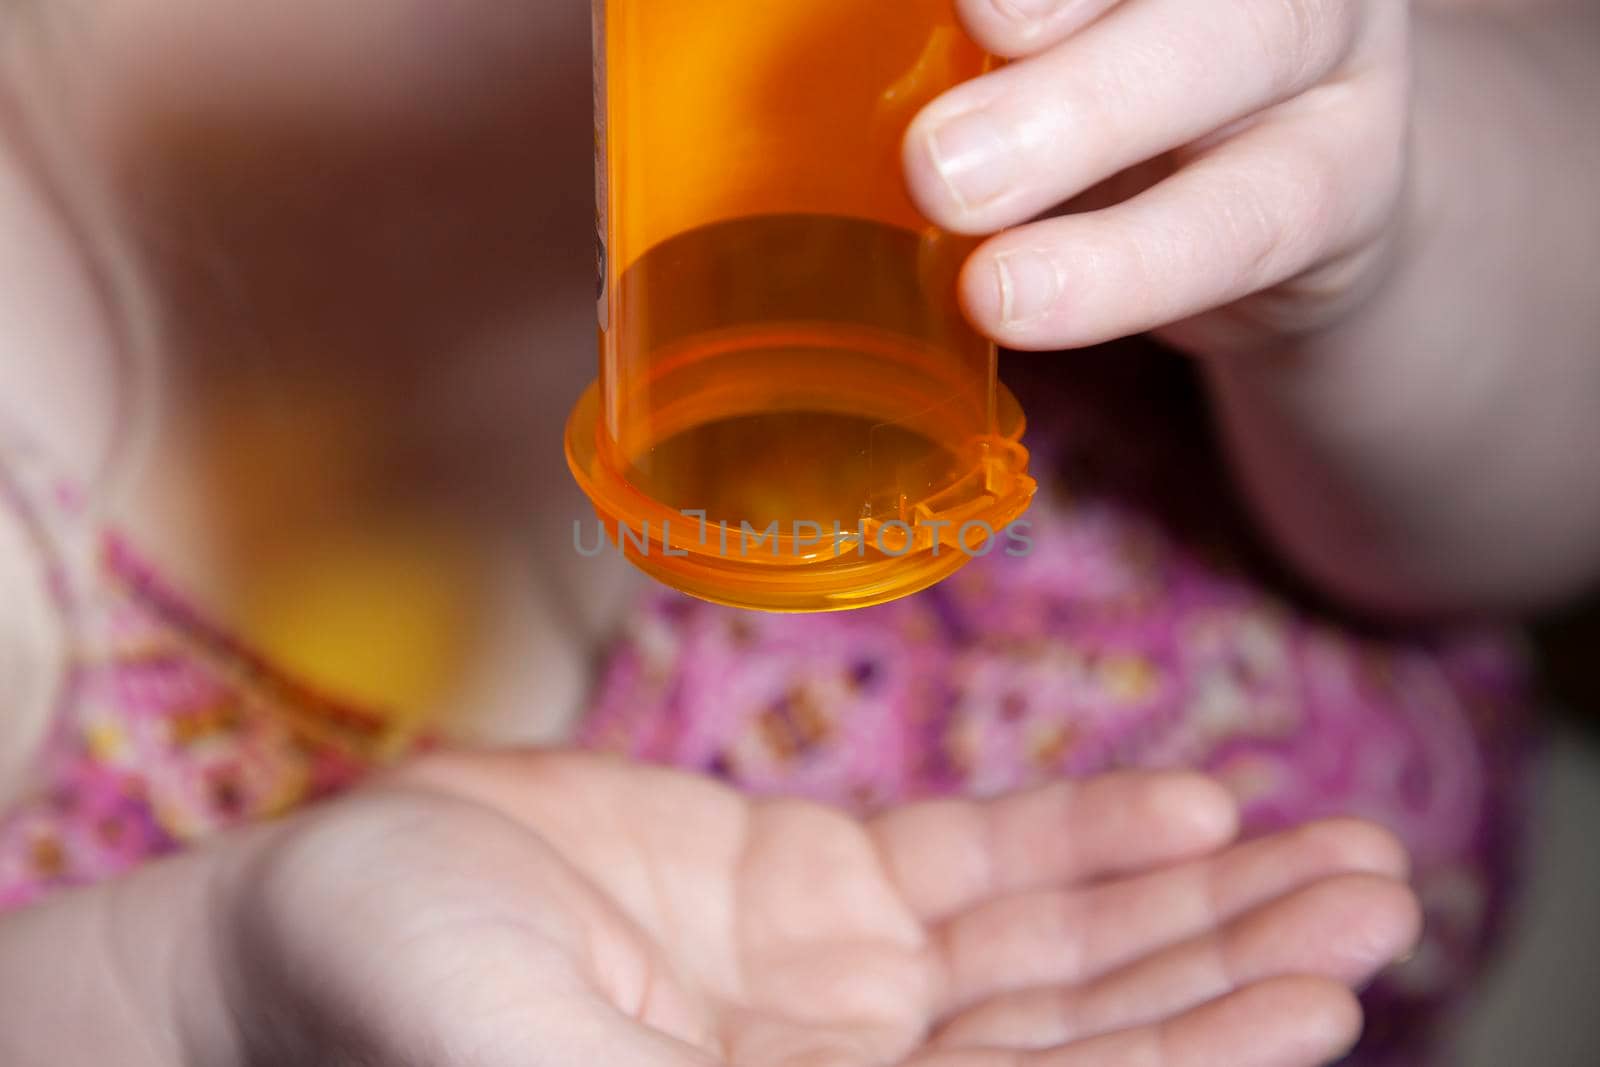 Woman dumping medication from a bottle into her hand